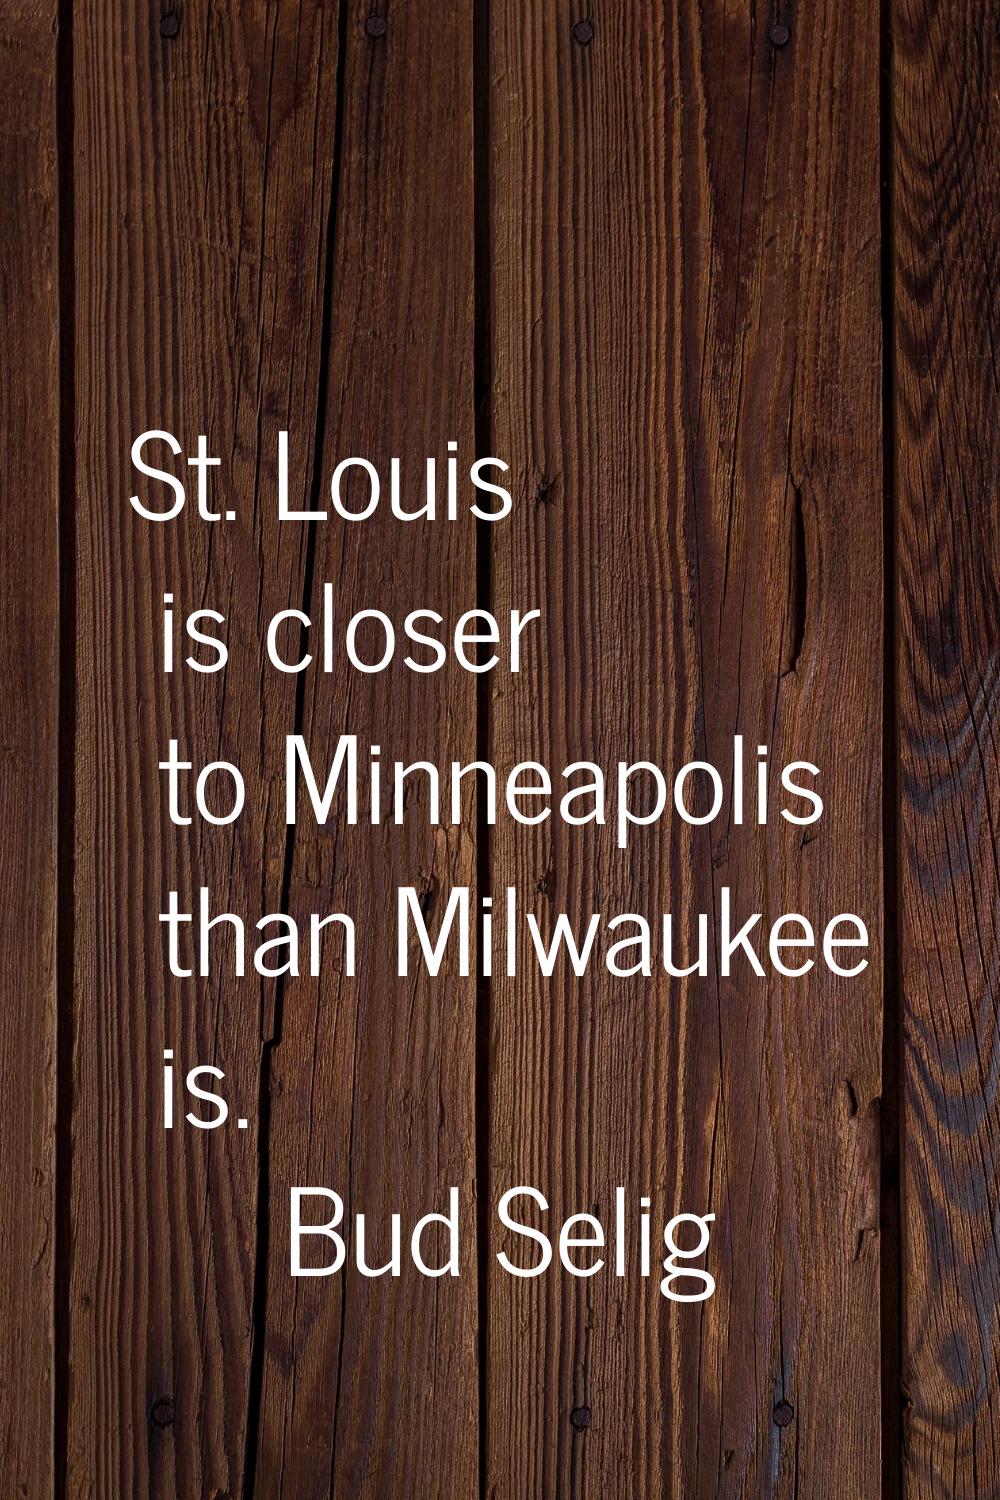 St. Louis is closer to Minneapolis than Milwaukee is.